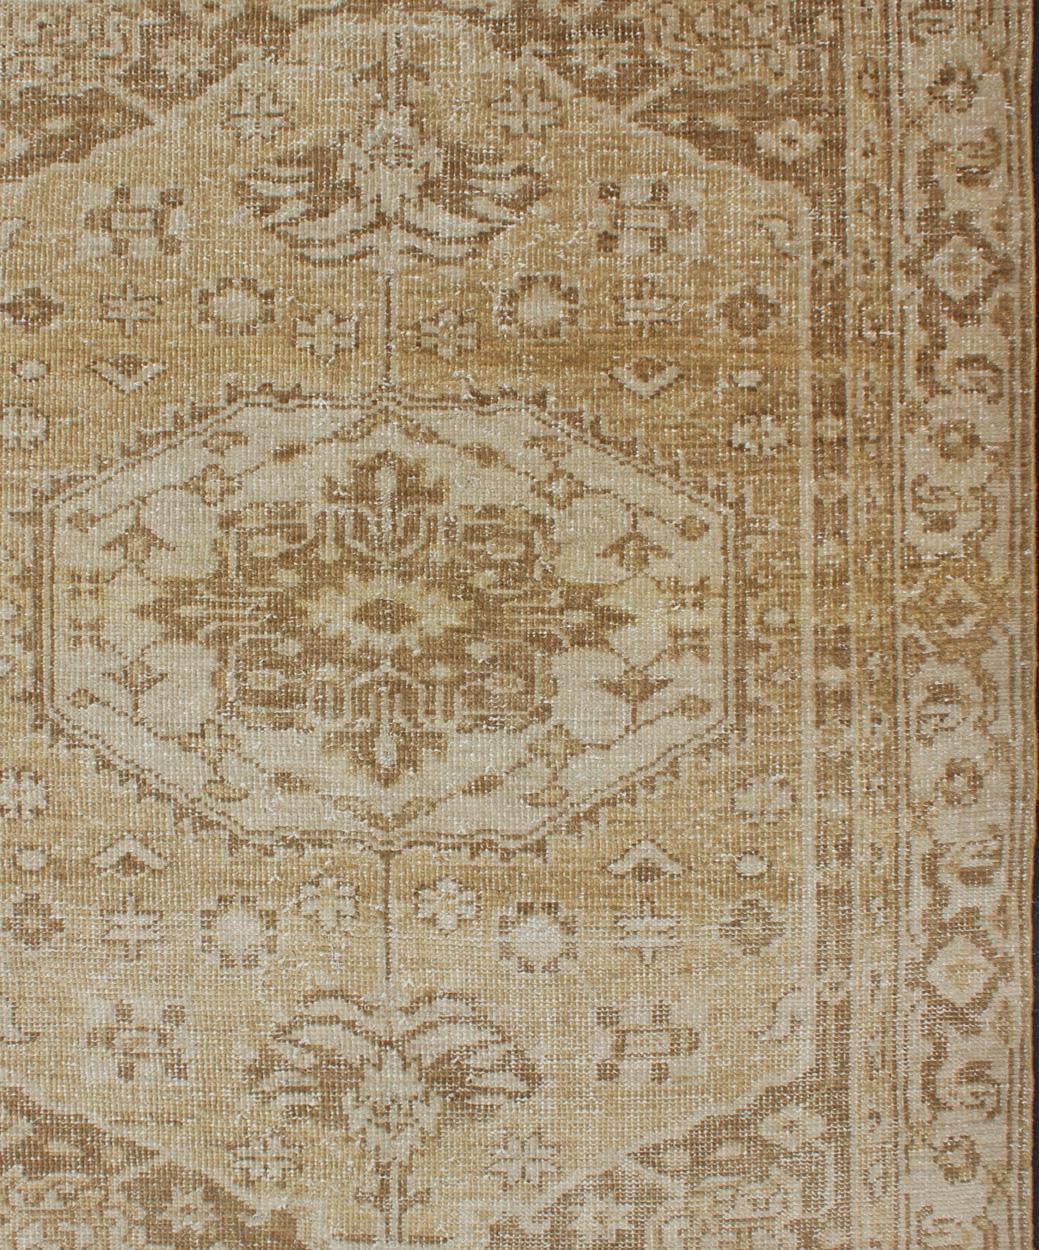 Oushak design rug in brown, taupe, cream, yellow with geometric large medallion design, rug/OB-9299492, country of origin / type: India/ Oushak

This hand knotted Oushak rug features a beautiful medallion design rendered warm and soft tones. 
